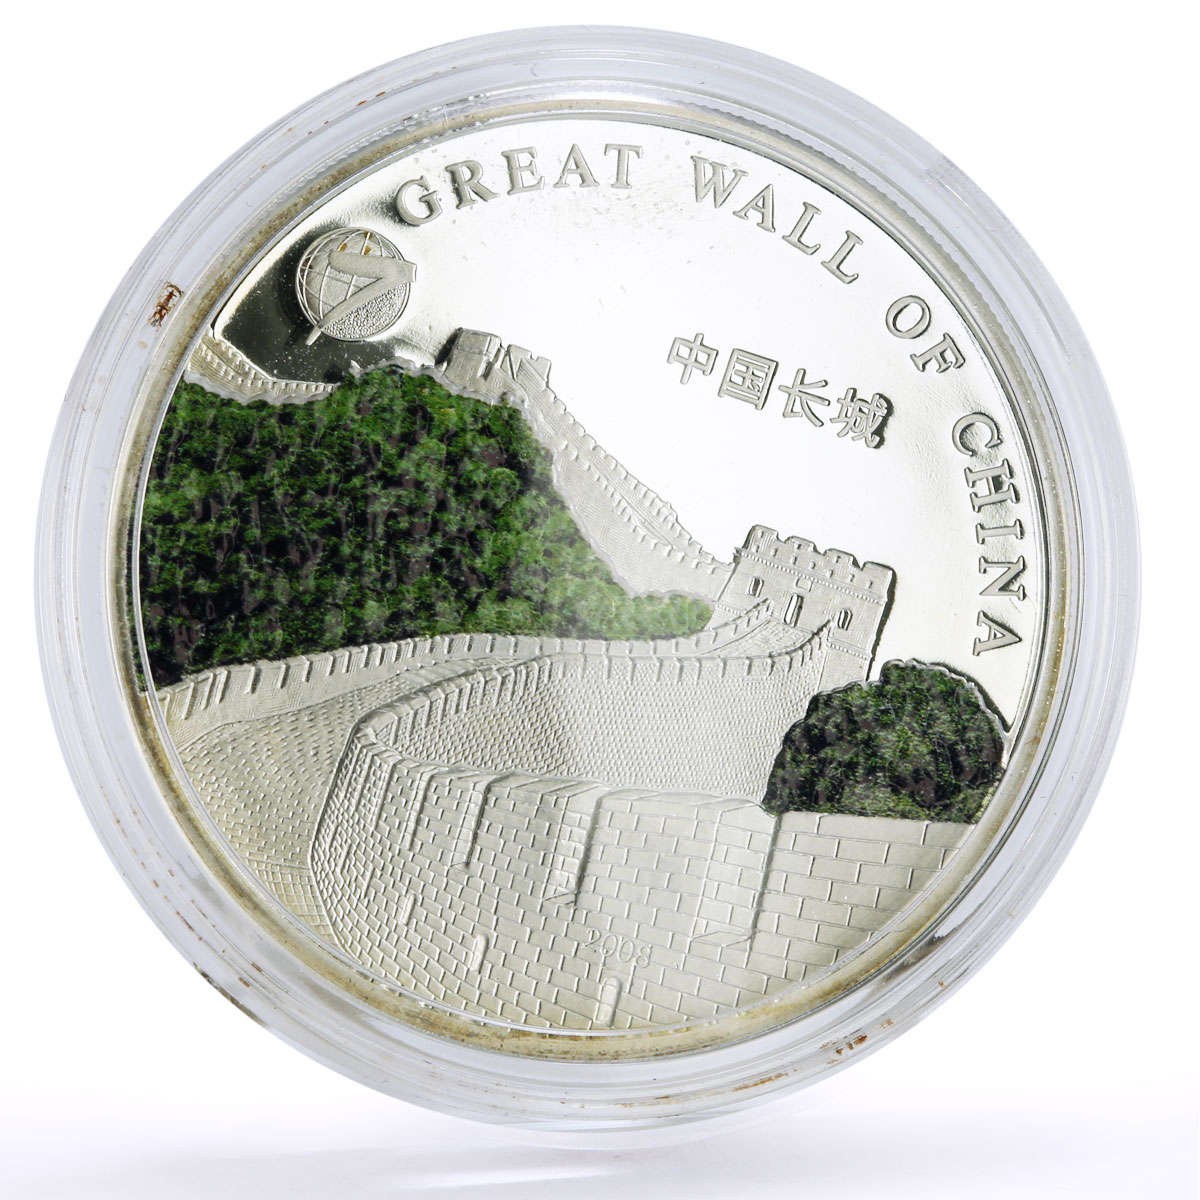 Mongolia 500 togrog New Wonders China Great Wall colored proof silver coin 2008